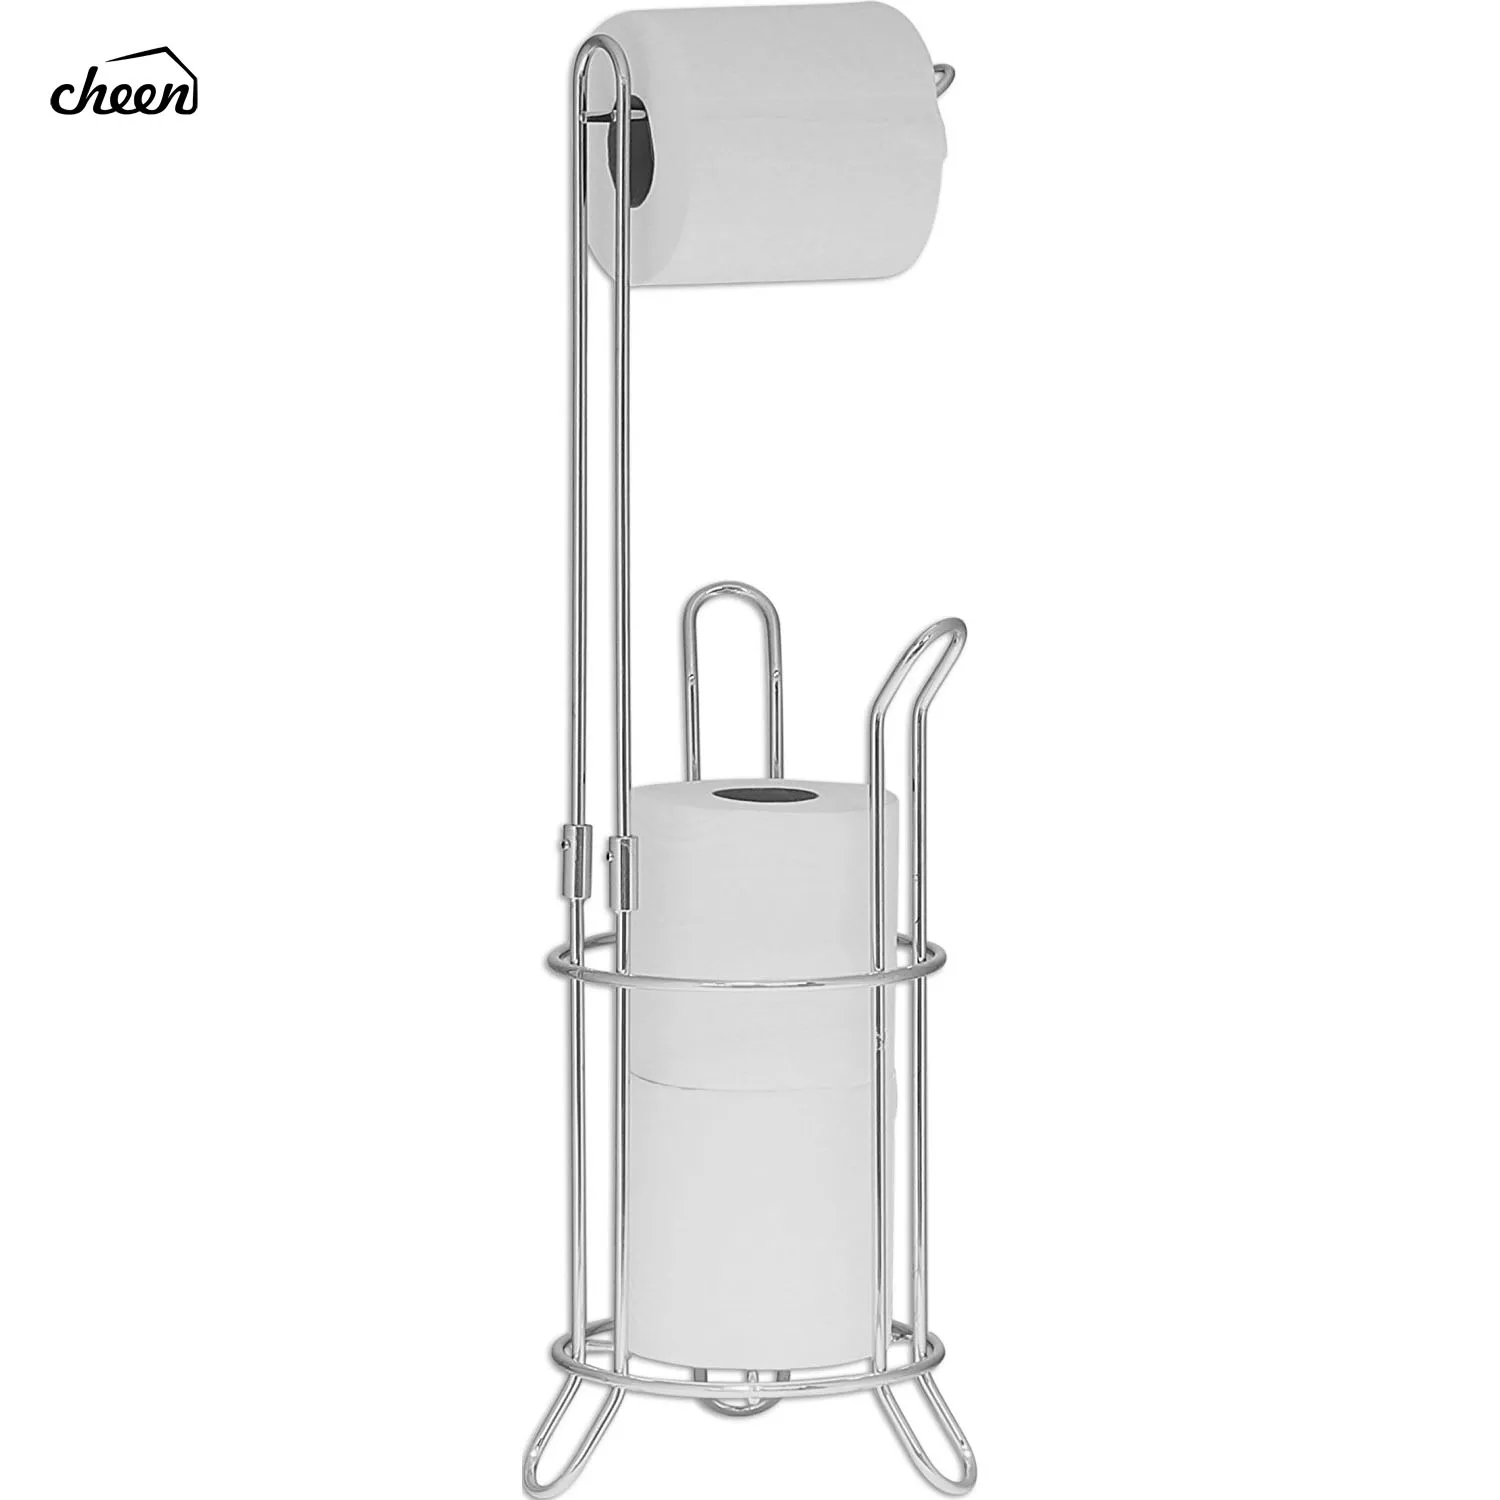 Practical Bathroom Accessory for Toilet or Guest Bathroom Chrome iDesign Toilet Roll Holder Free Standing Compact Metal Toilet Roll Storage for 4 Paper Rolls